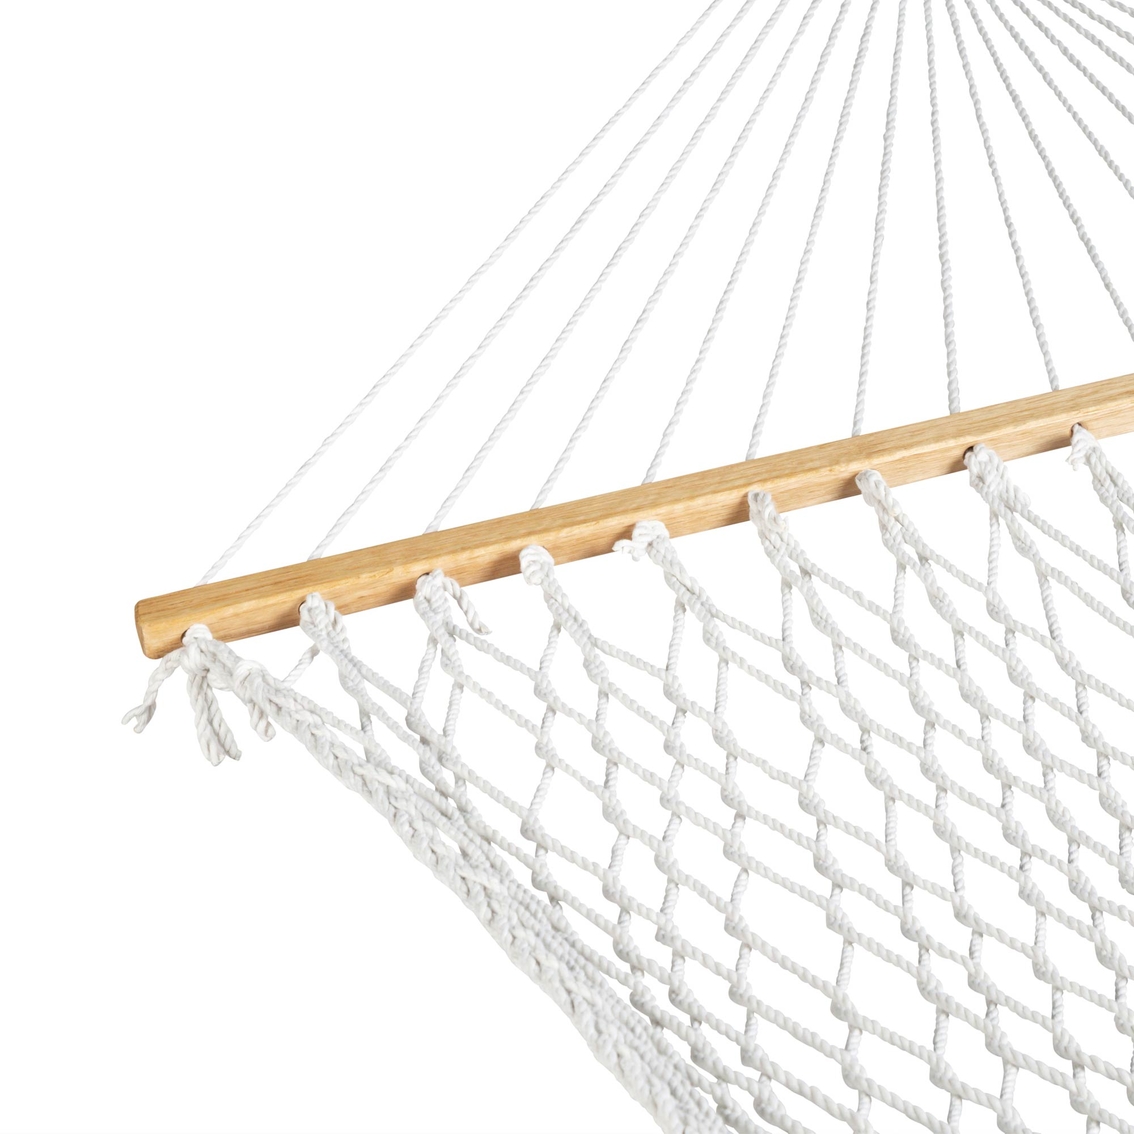 Bliss Hammocks 2 Person Classic Poly Rope Hammock; with Natural Rope - Image 4 of 5